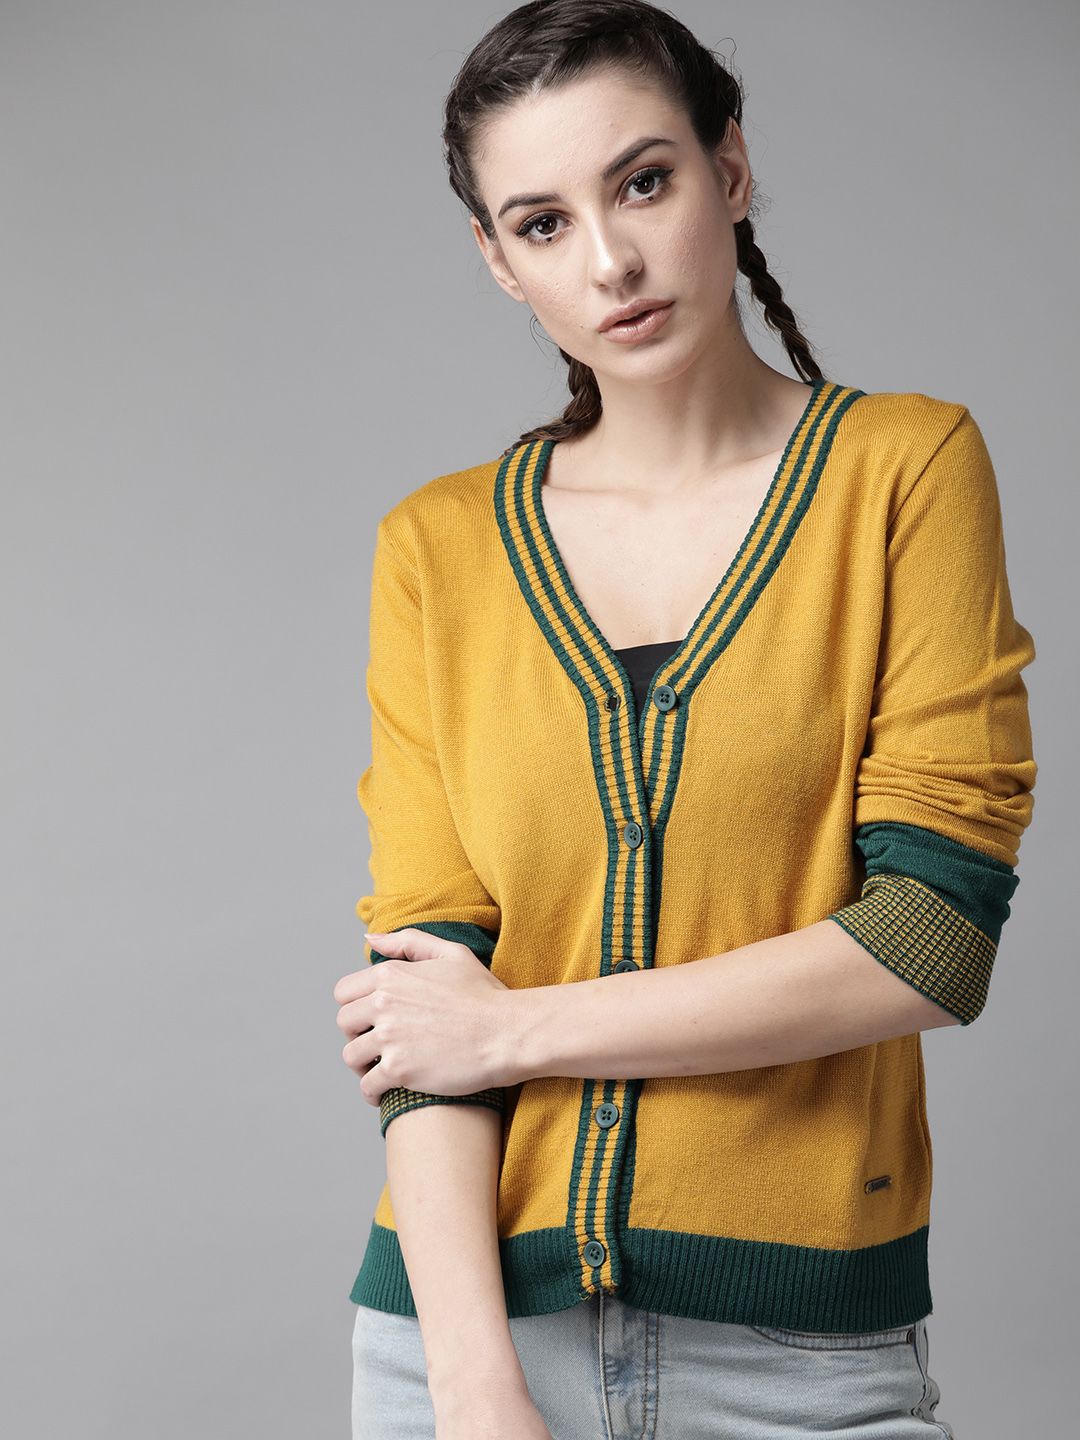 The Roadster Lifestyle Co Women Mustard Yellow Solid Cardigan Price in India